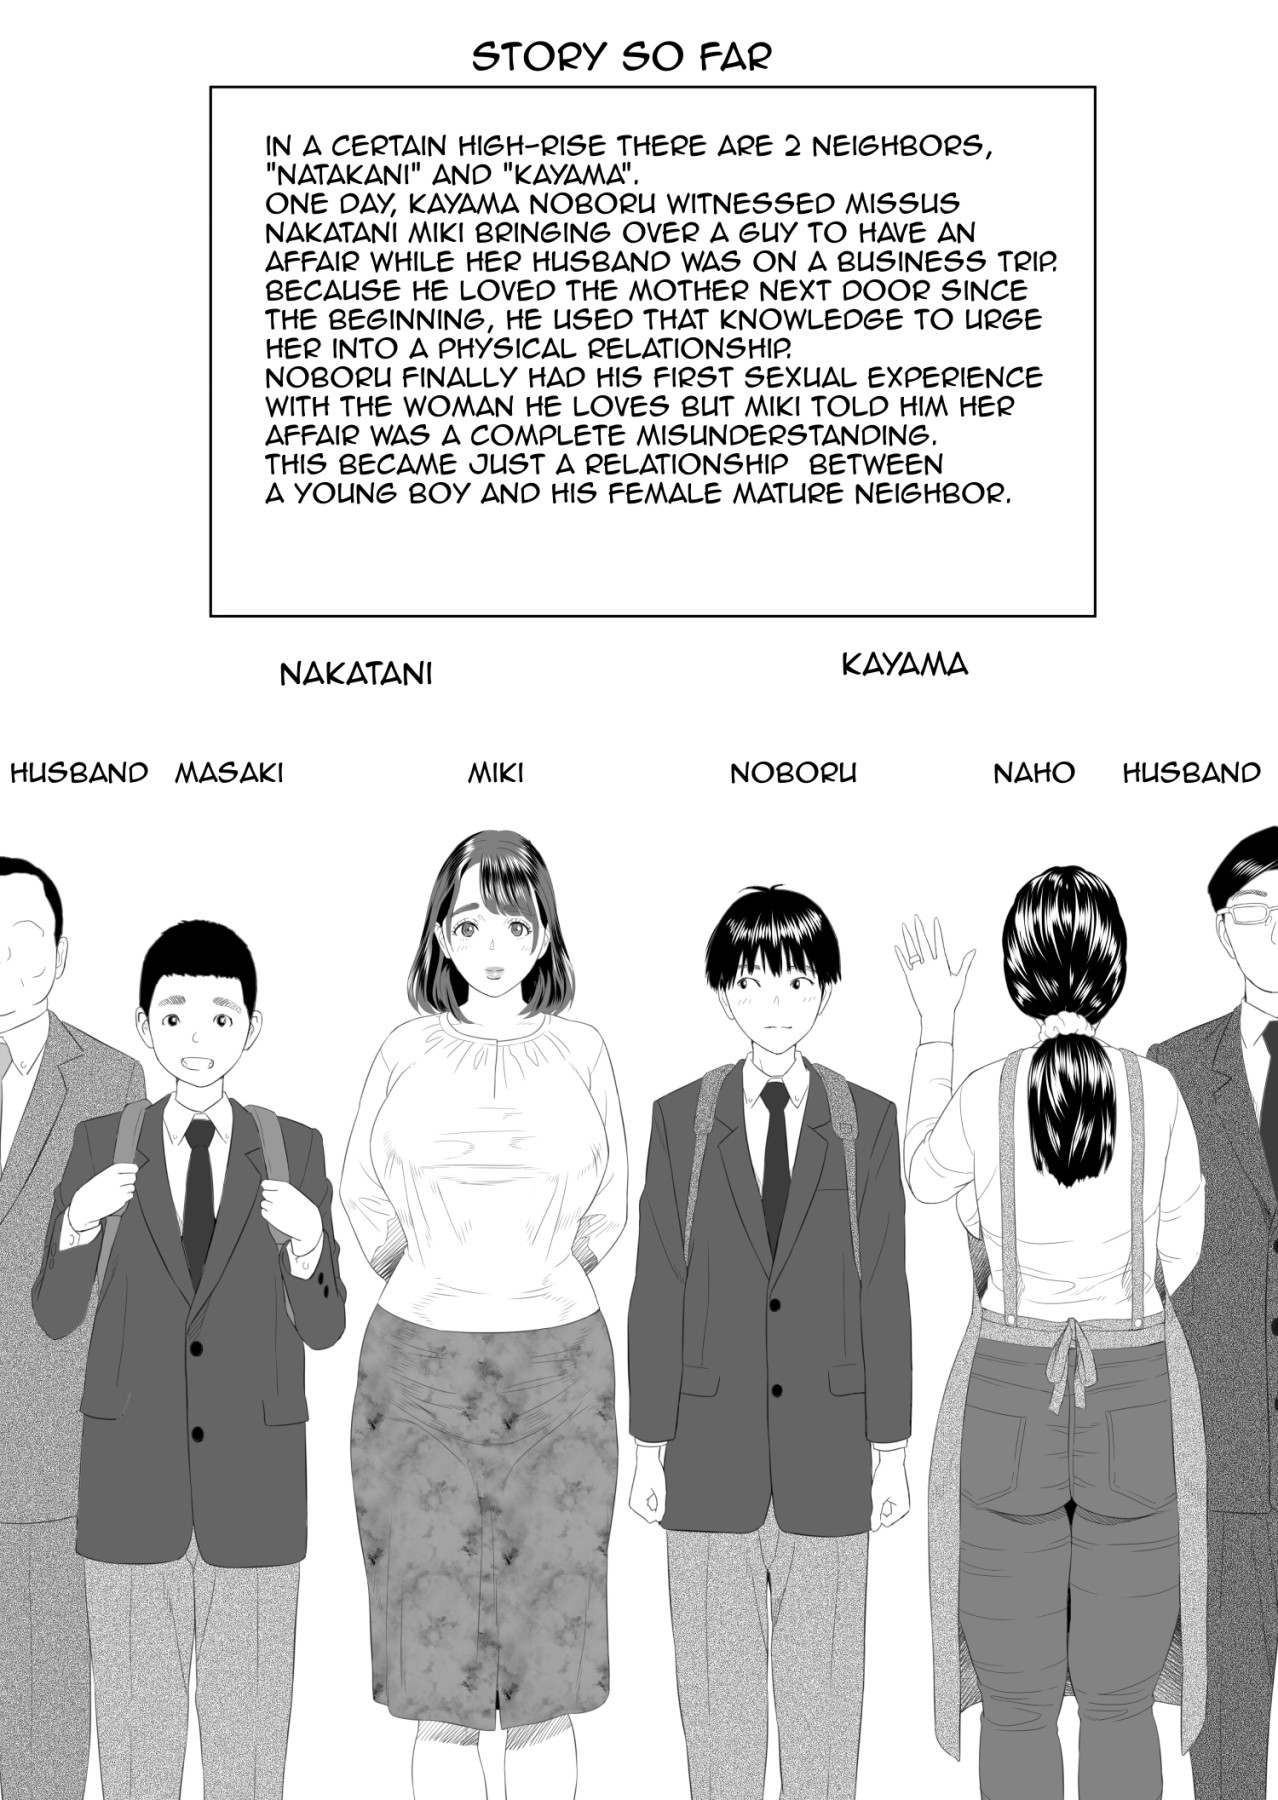 Hentai Manga Comic-Neighborhood Seduction This Is What Happened With The Mother Next Door 2-Read-2